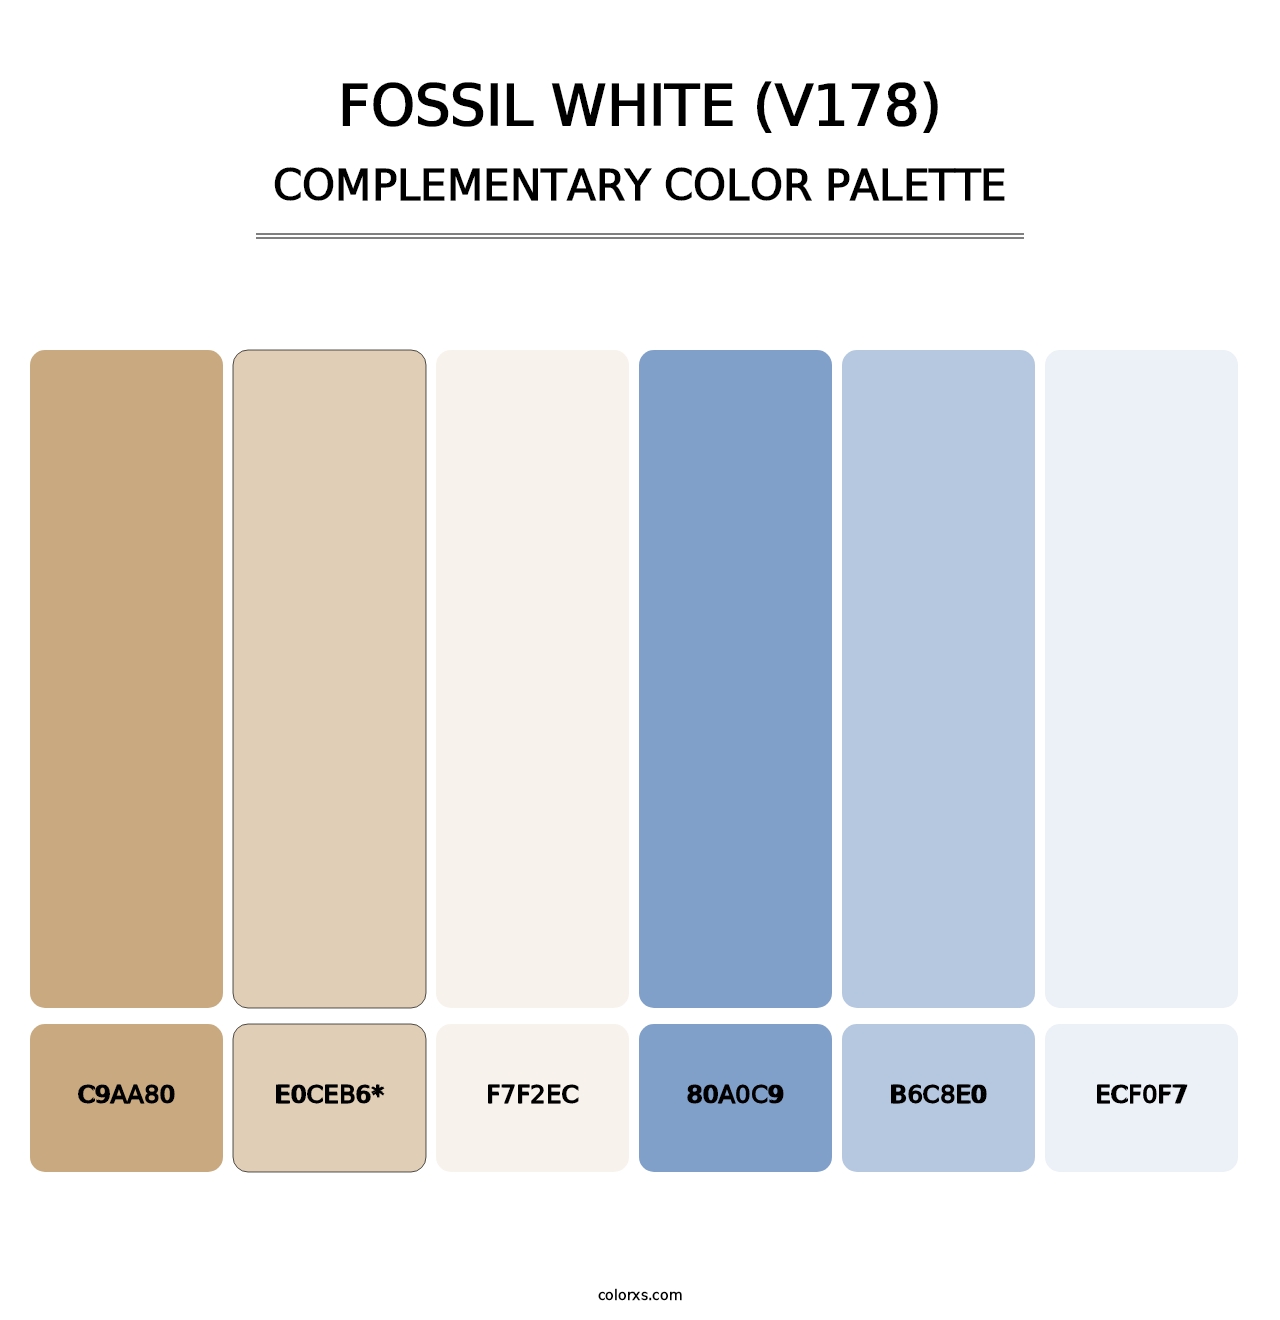 Fossil White (V178) - Complementary Color Palette